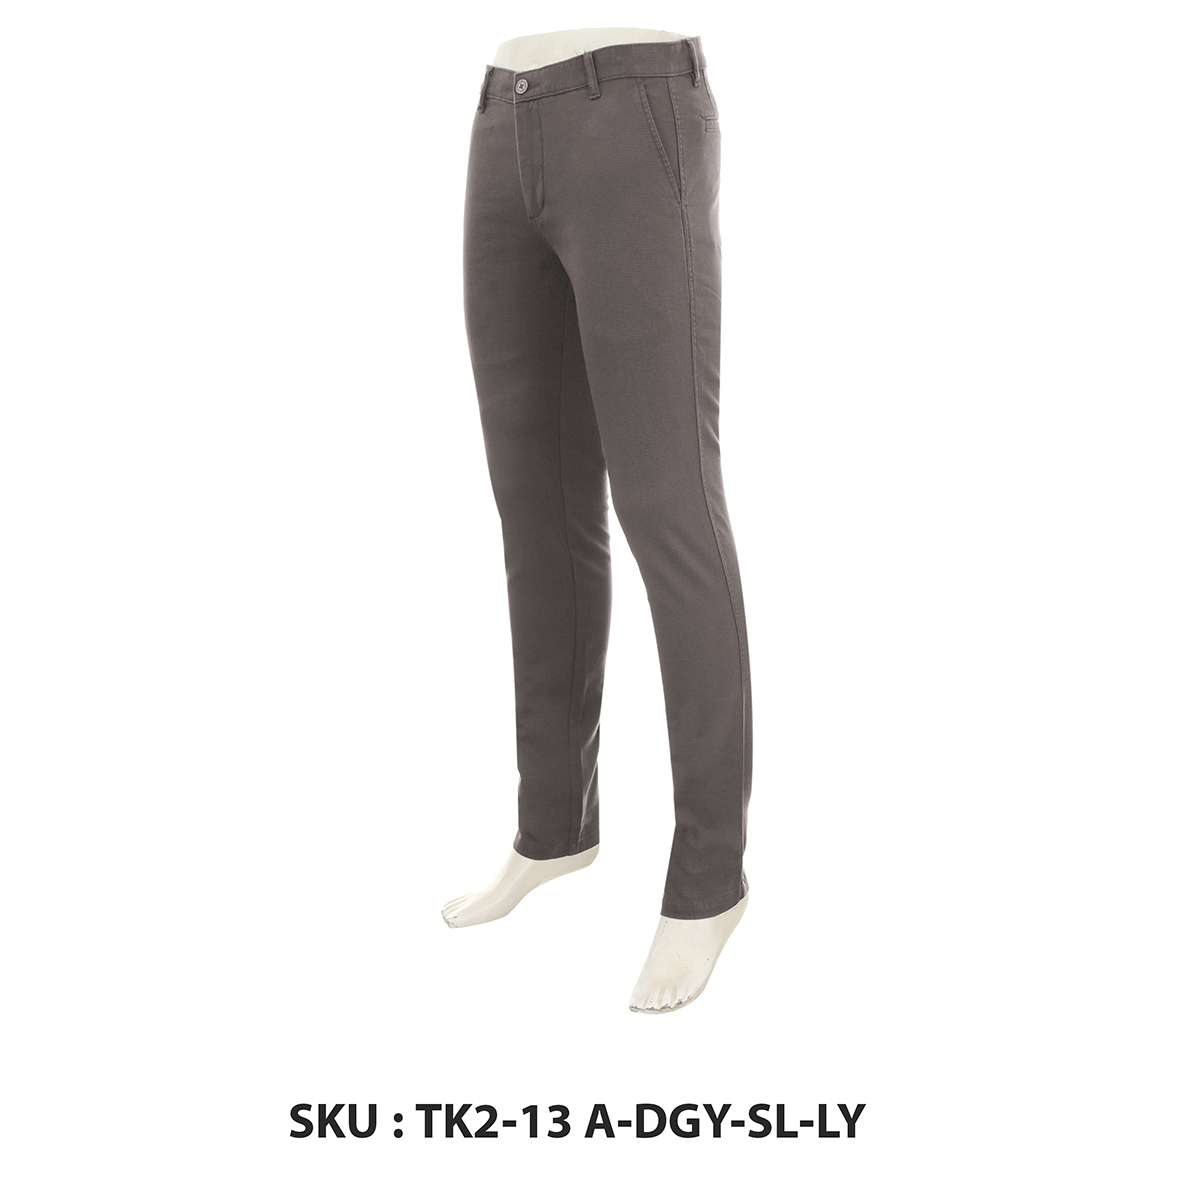 Classic Polo Mens Trousers Tk2-13 A-Dgy-Sl-Ly Grey 34